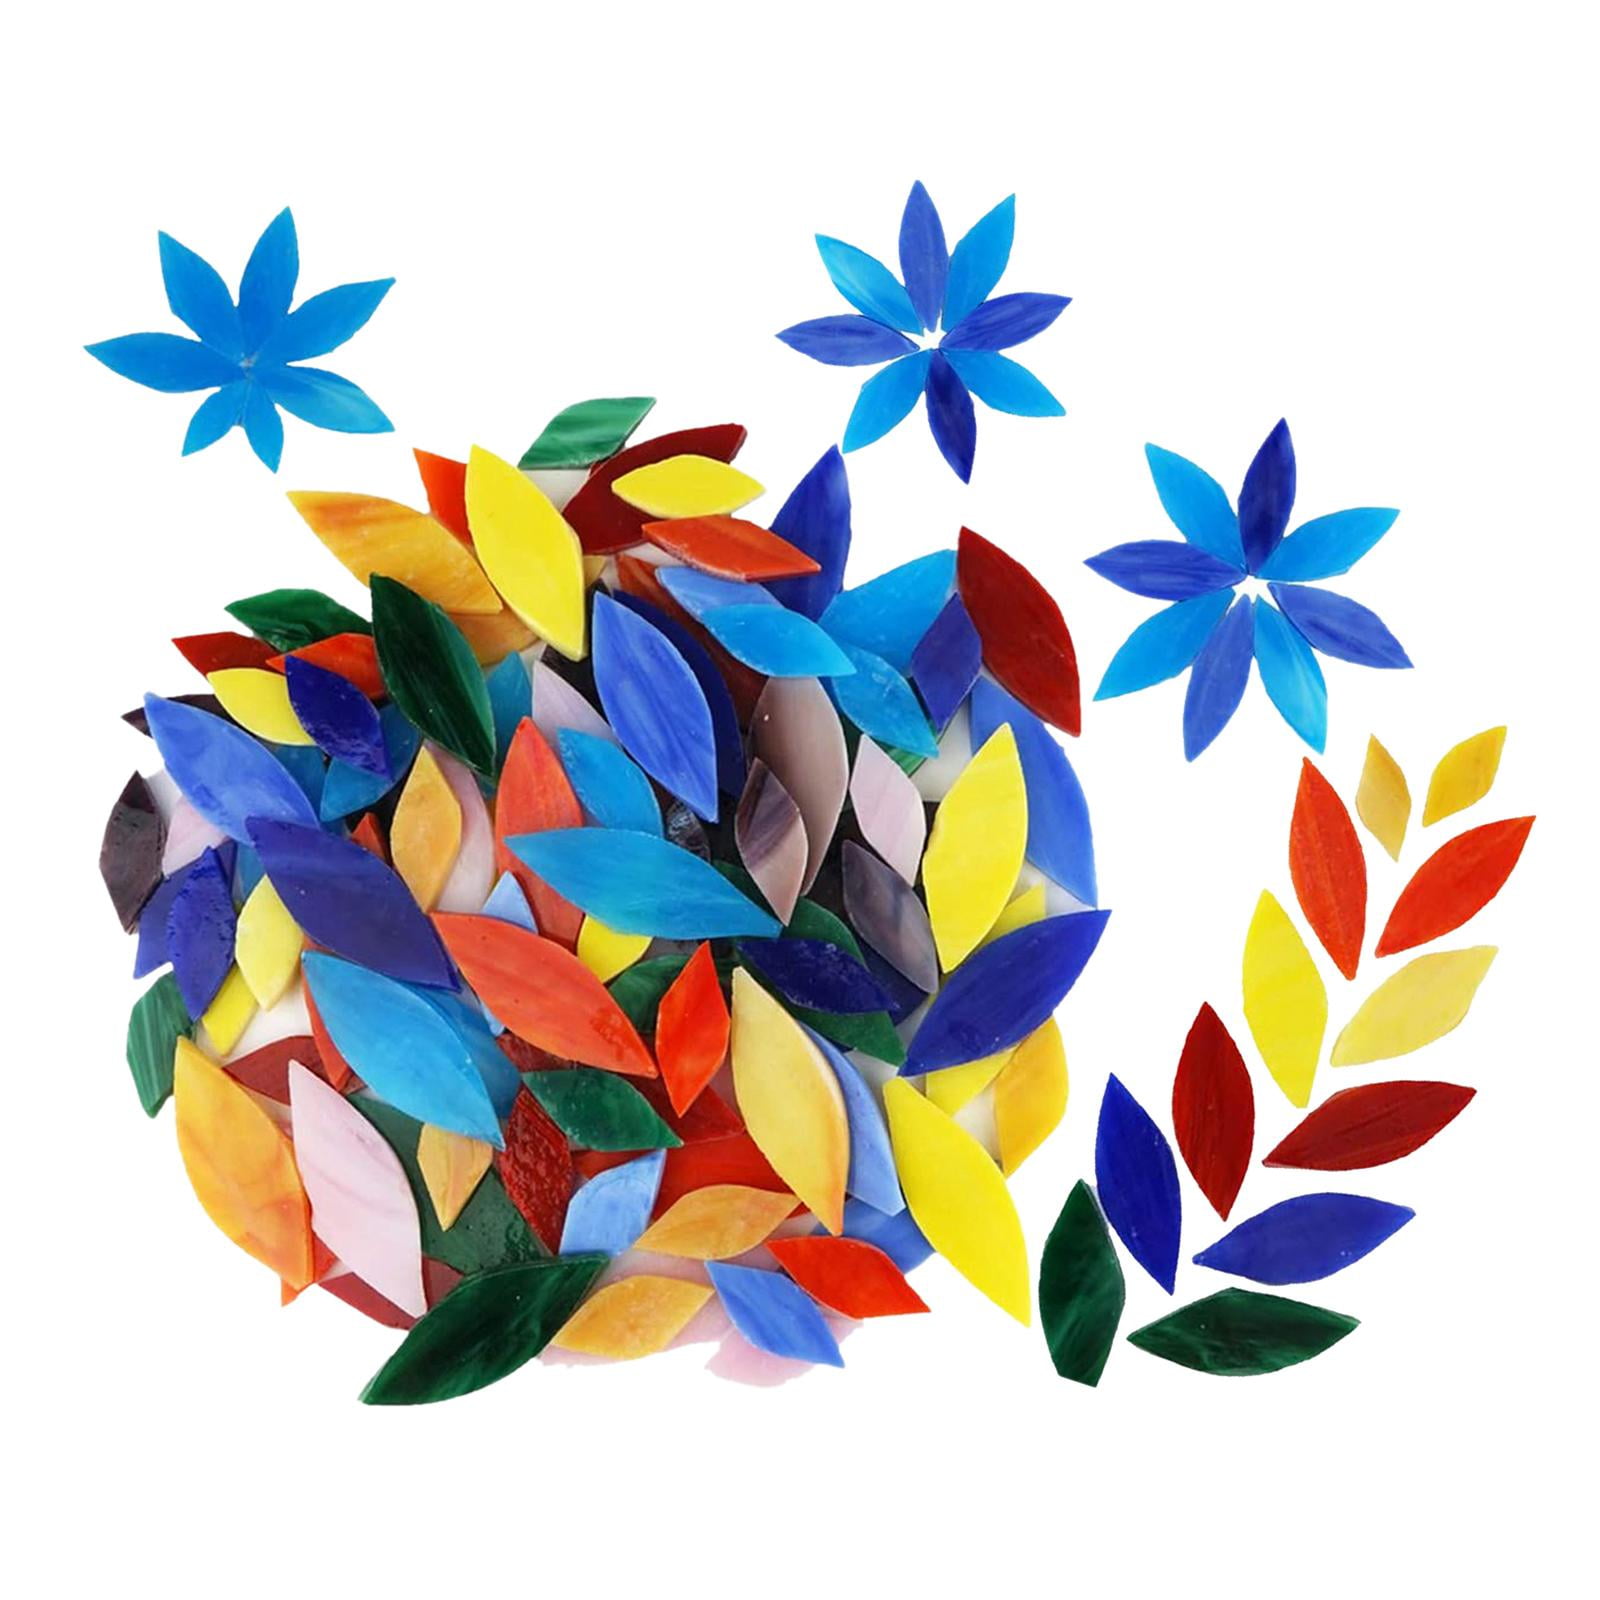 Mornajina 100 Pieces Petal Mosaic Tiles Mixed Color Mosaic Glass Pieces  Hand-Cut Stained Glass Flower Leaves Tiles for Crafts Colorful Stained  Glass Pieces Mosaic Projects 100pcs